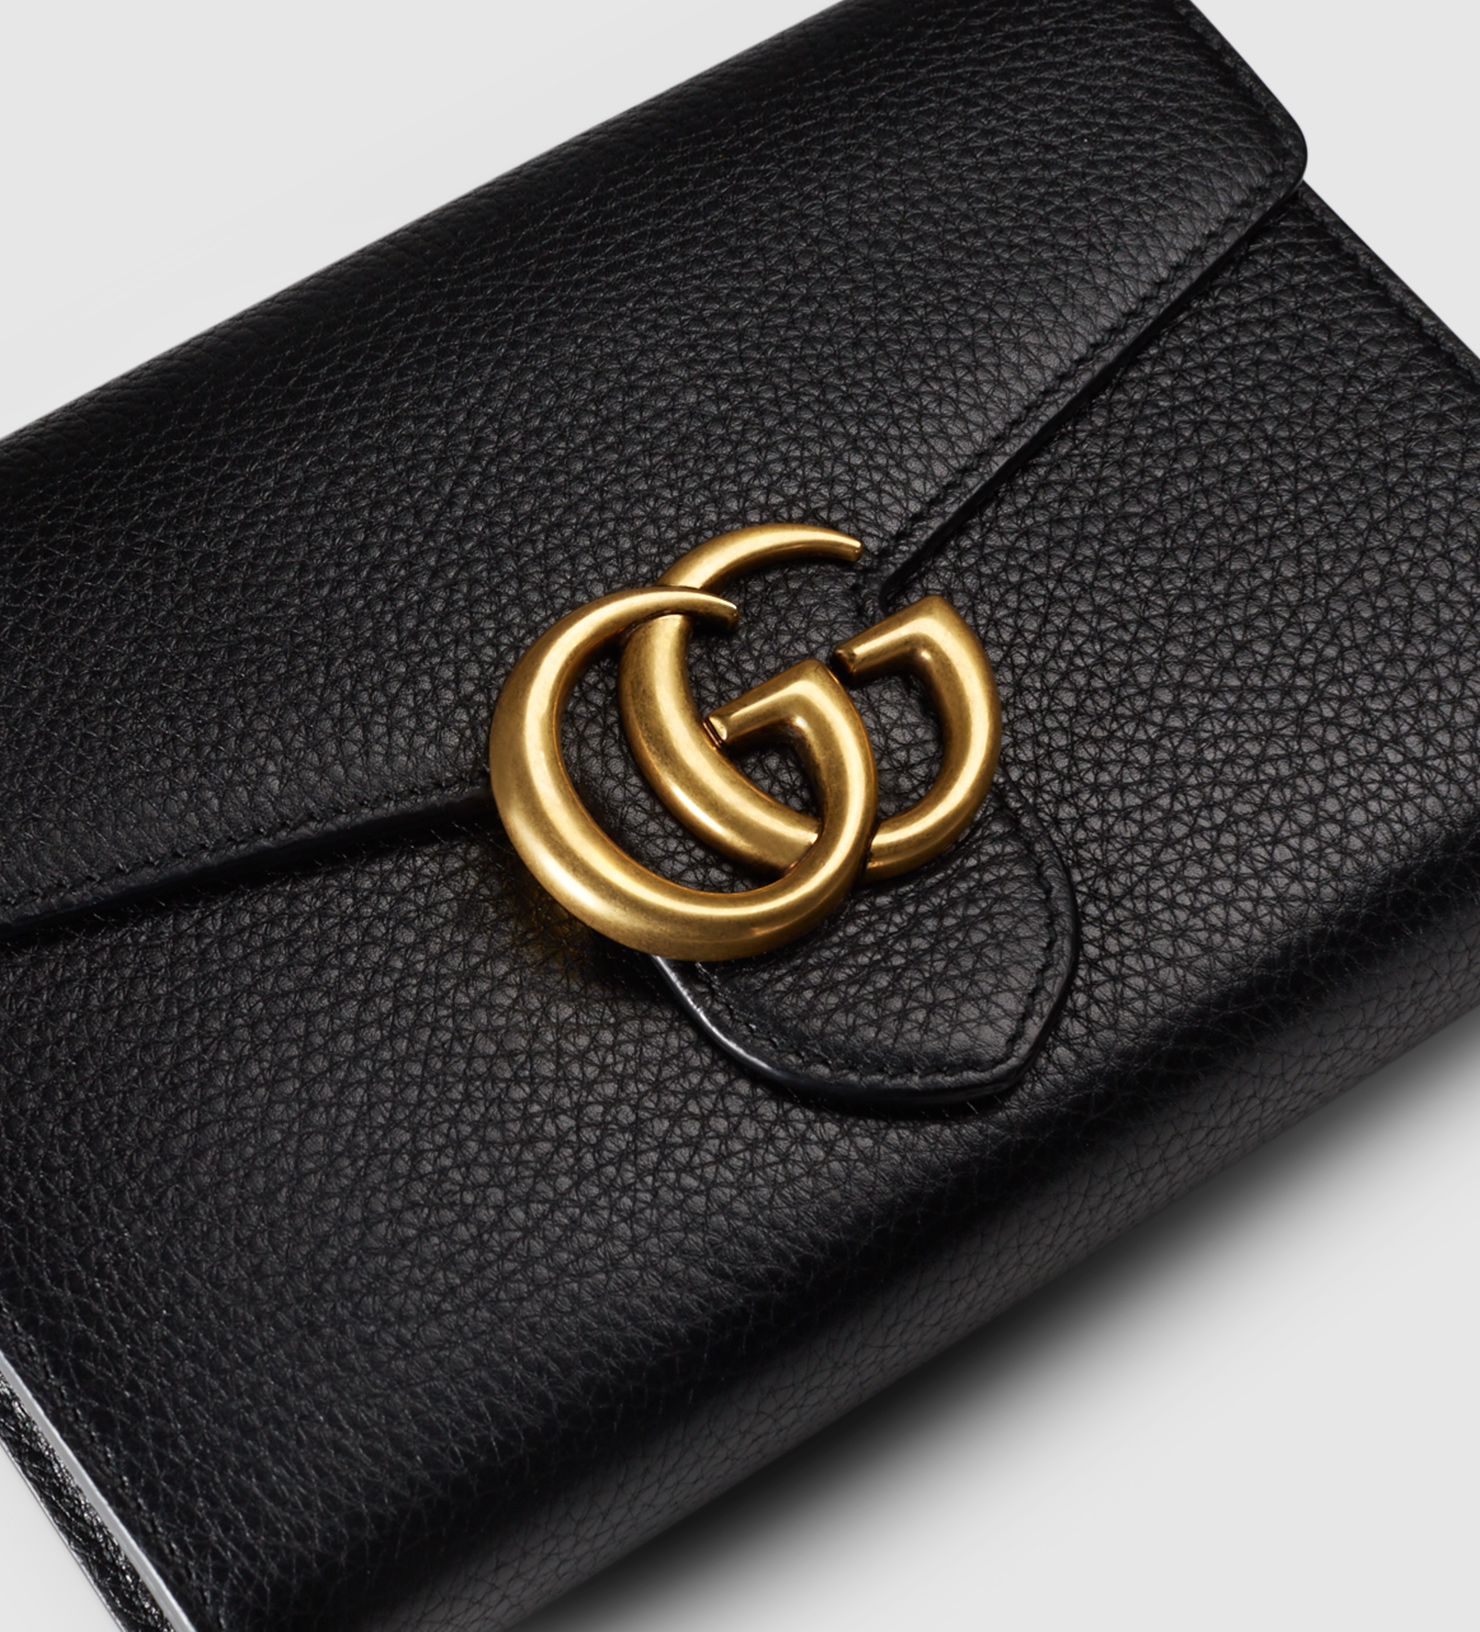 gucci marmont leather chain wallet